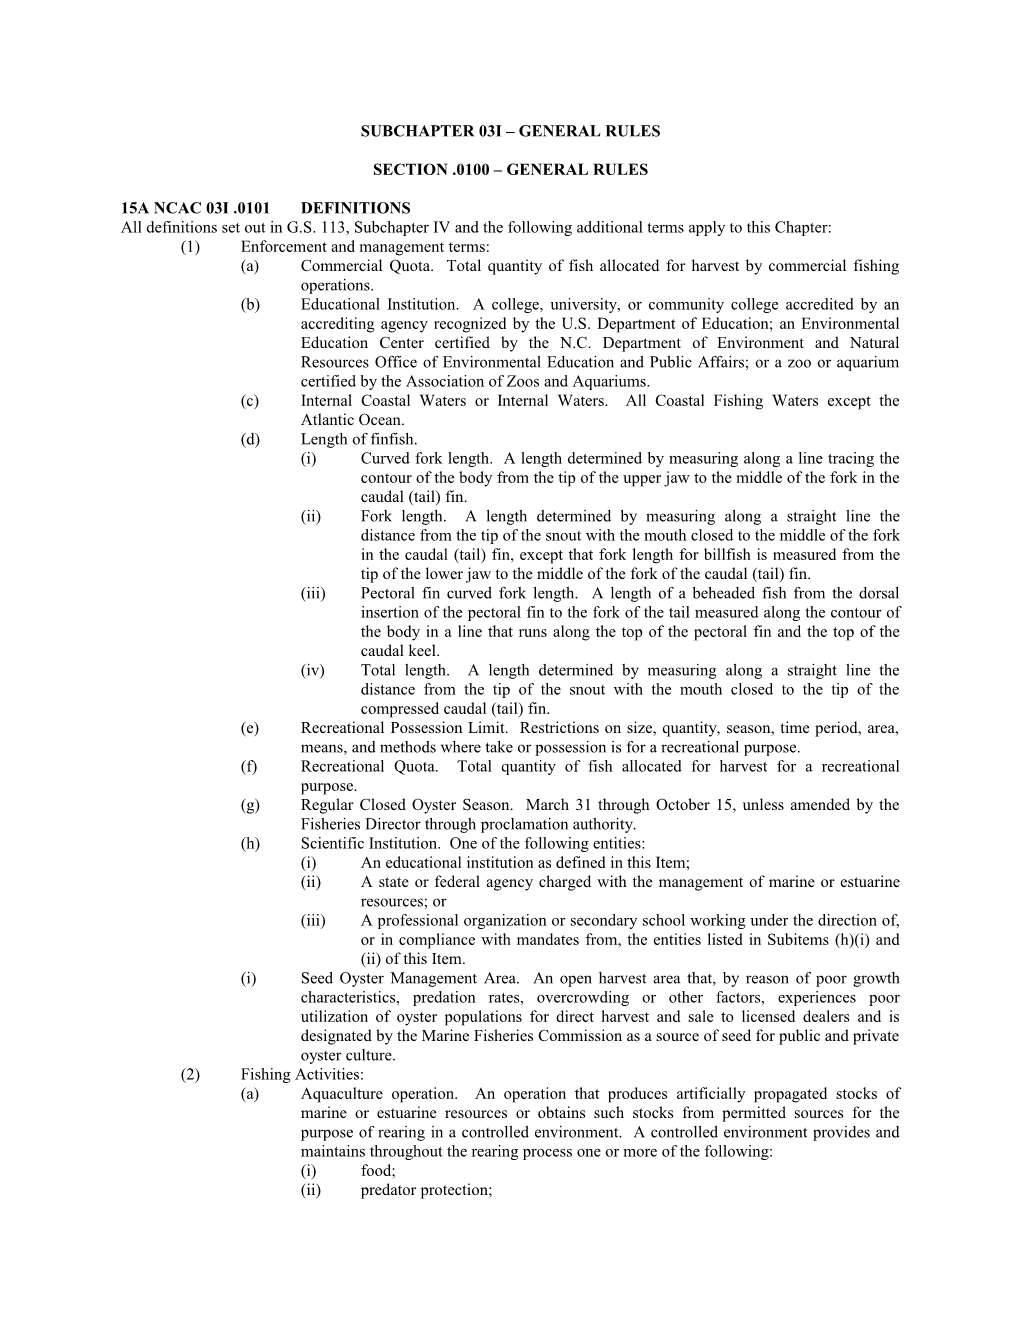 Subchapter 03I General Rules